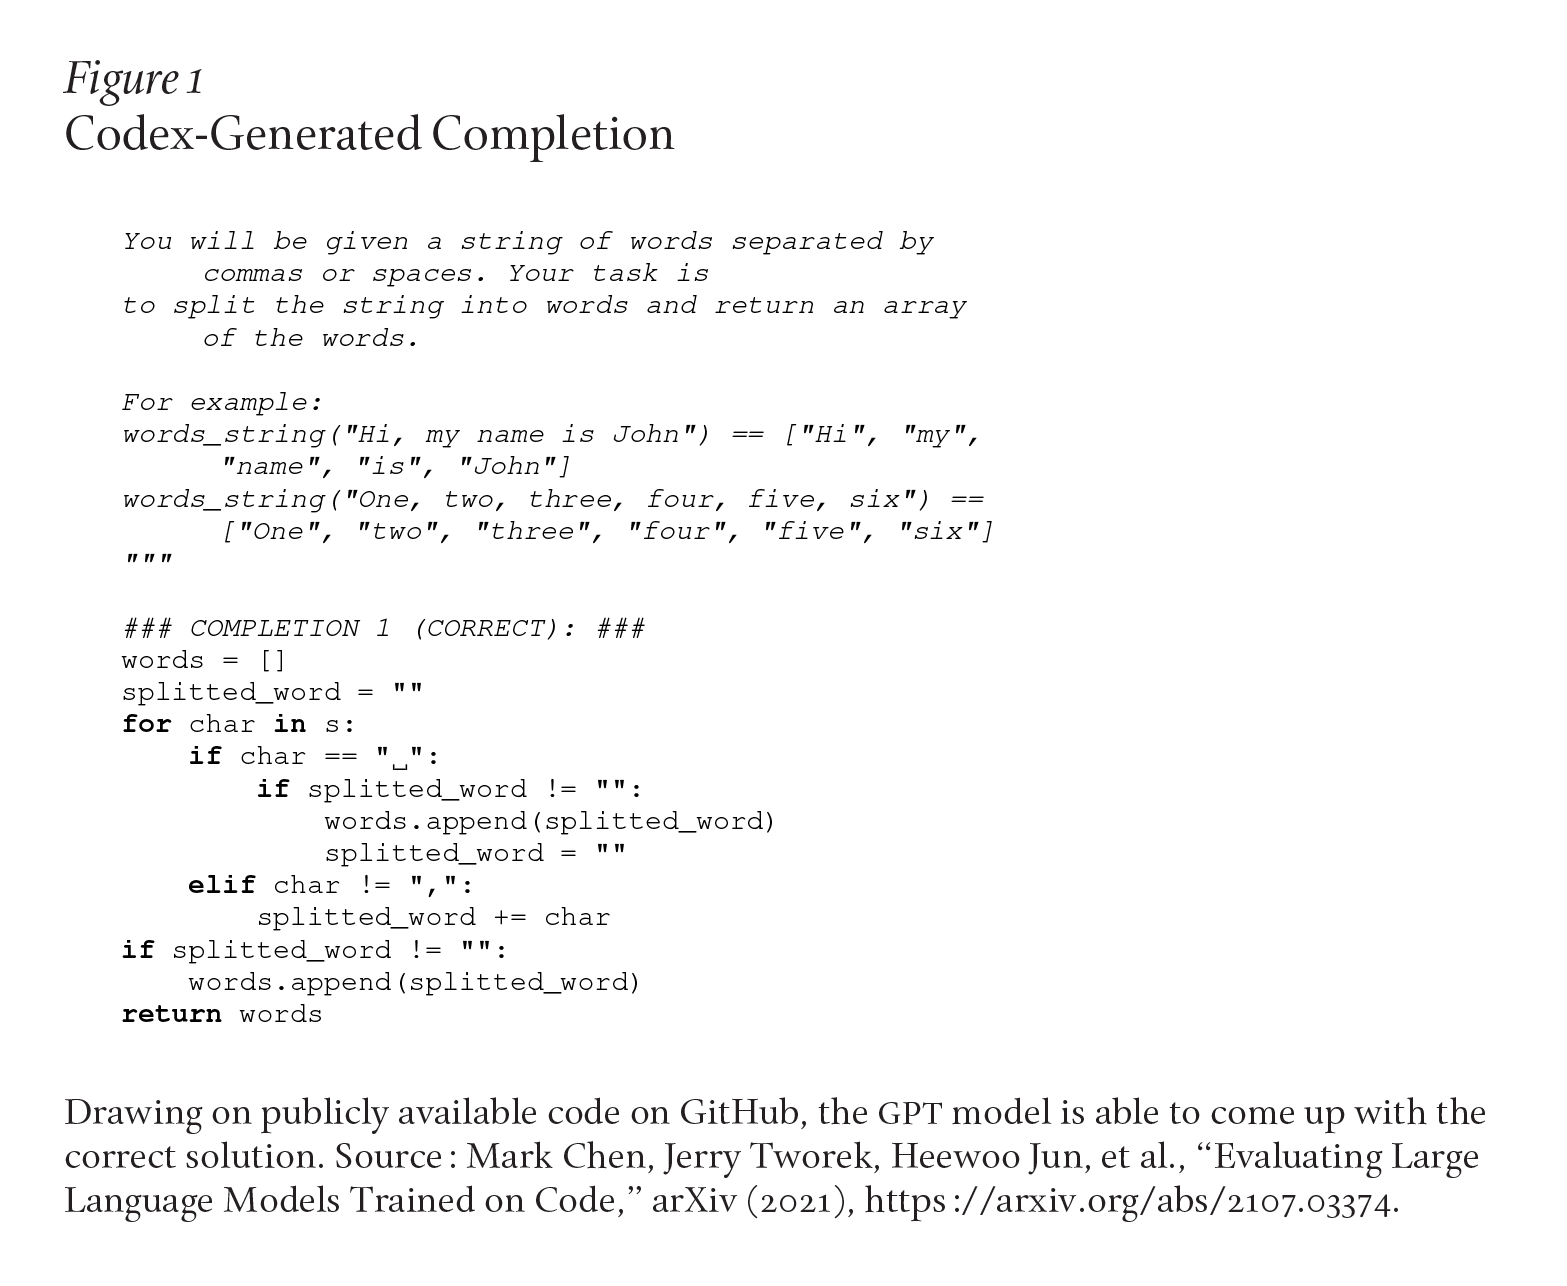 Example of a Codex-Generated Completion